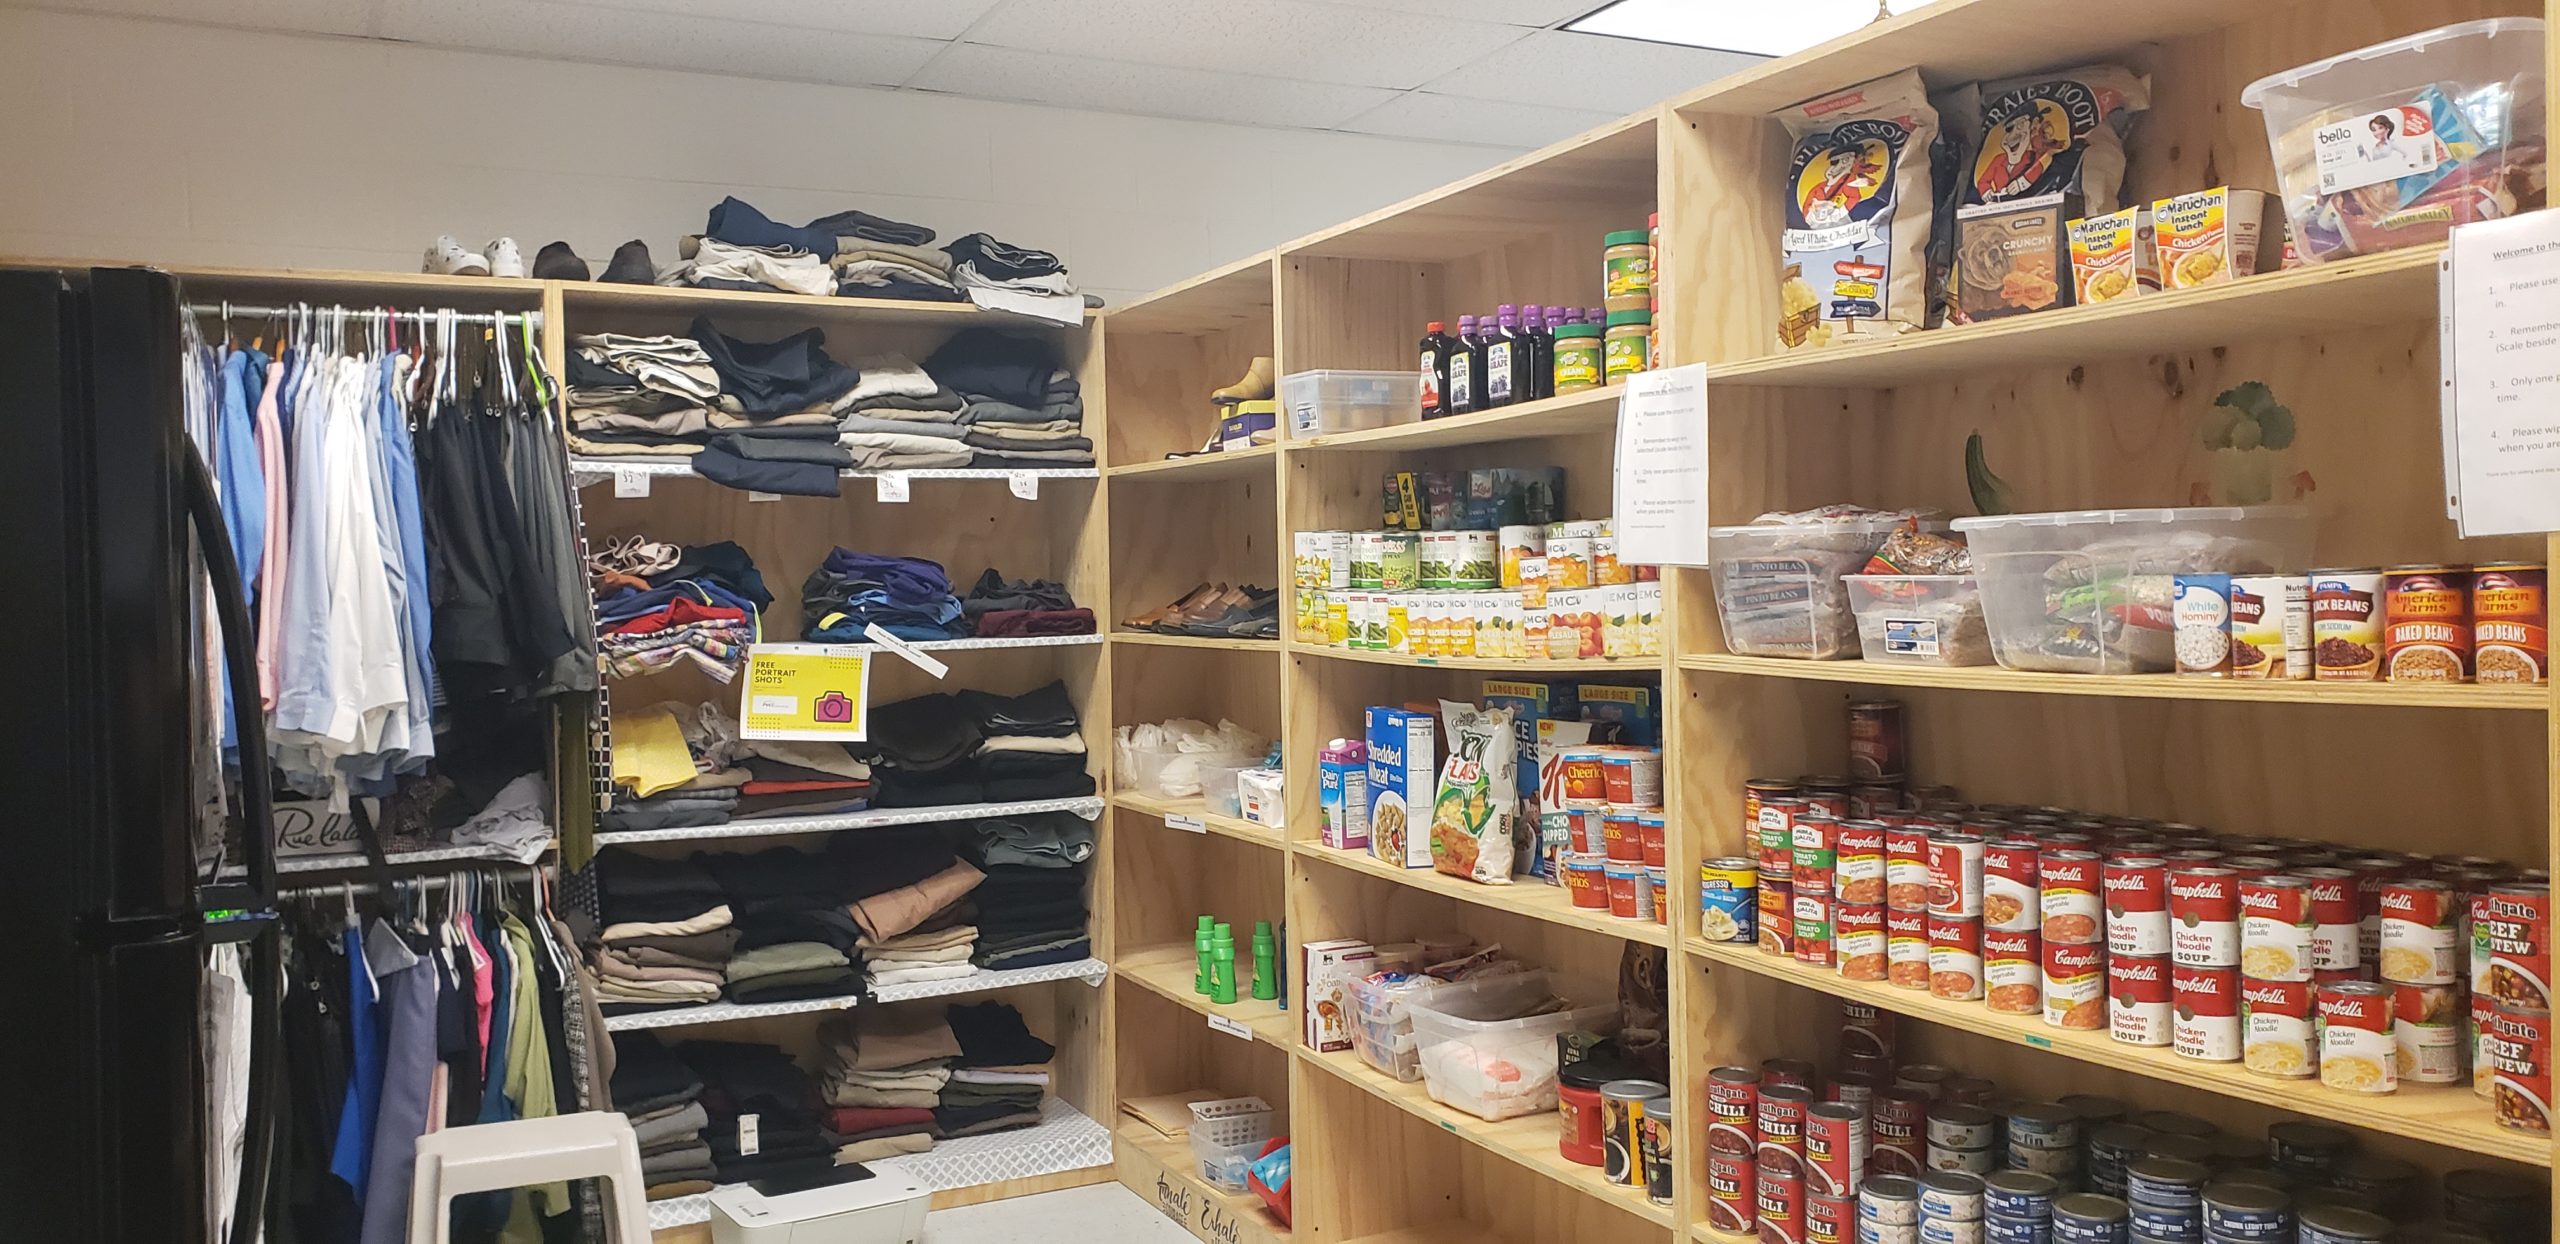 A wide shot of a food pantry stacked with cans of soup and other foods next to a sheft with folded clothes on it